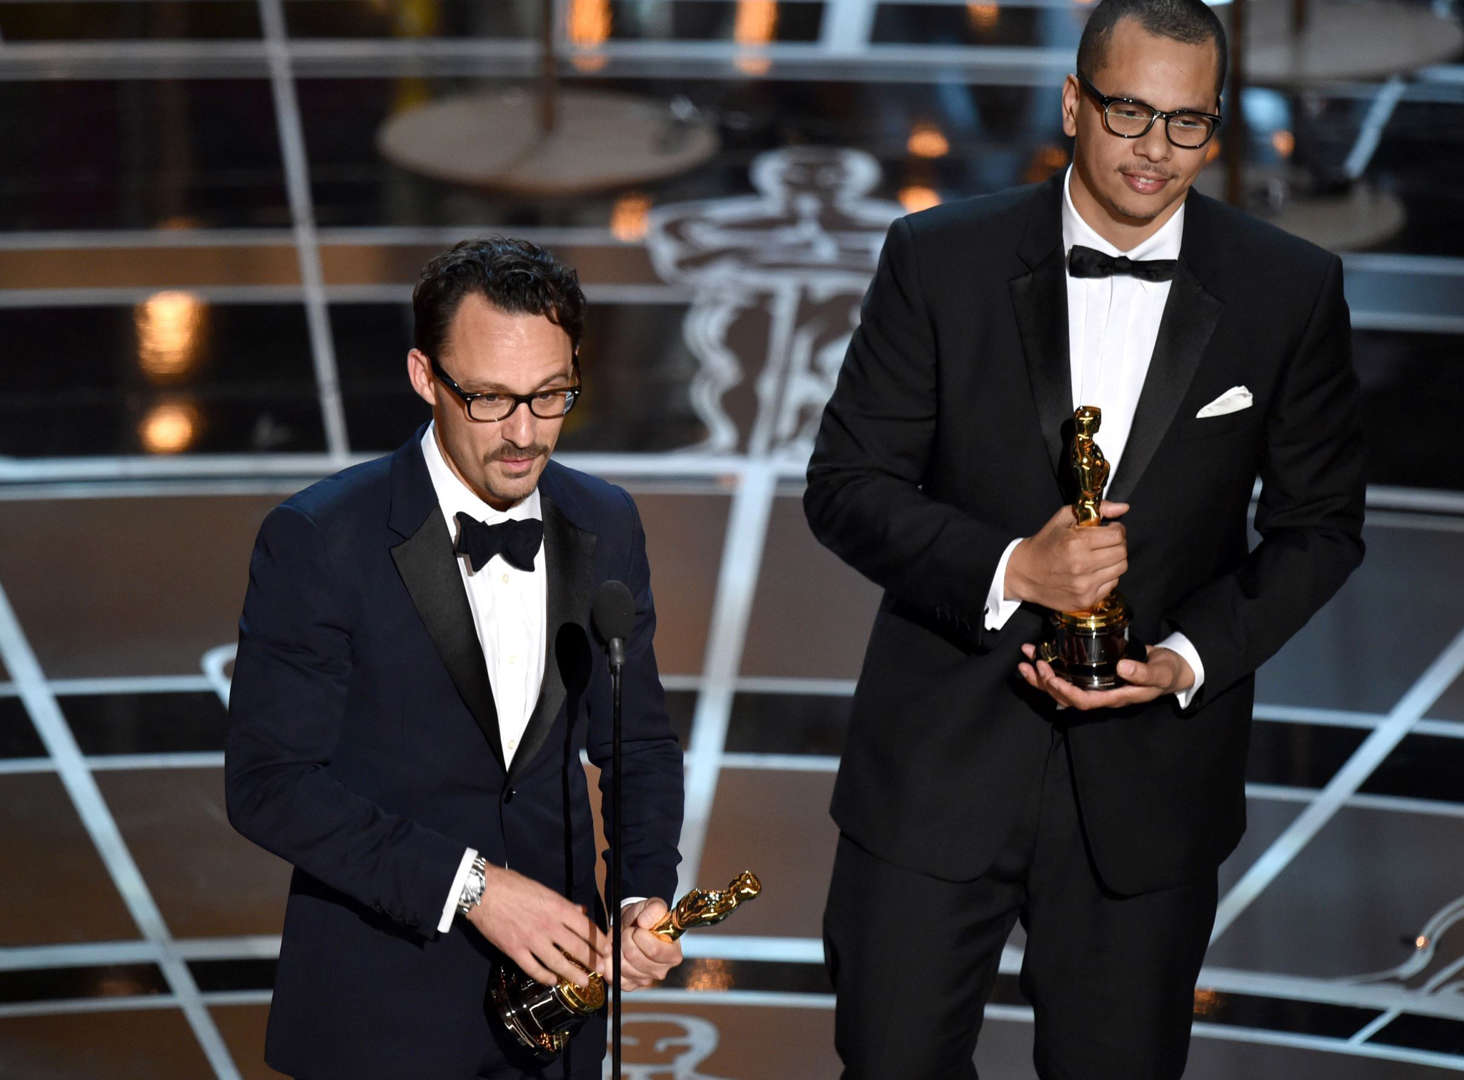 Mat Kirkby, left, and James Lucas accept the award for best live action short film for “The Phone Call” at the Oscars on Sunday, Feb. 22, 2015, at the Dolby Theatre in Los Angeles. (Photo by John Shearer/Invision/AP)